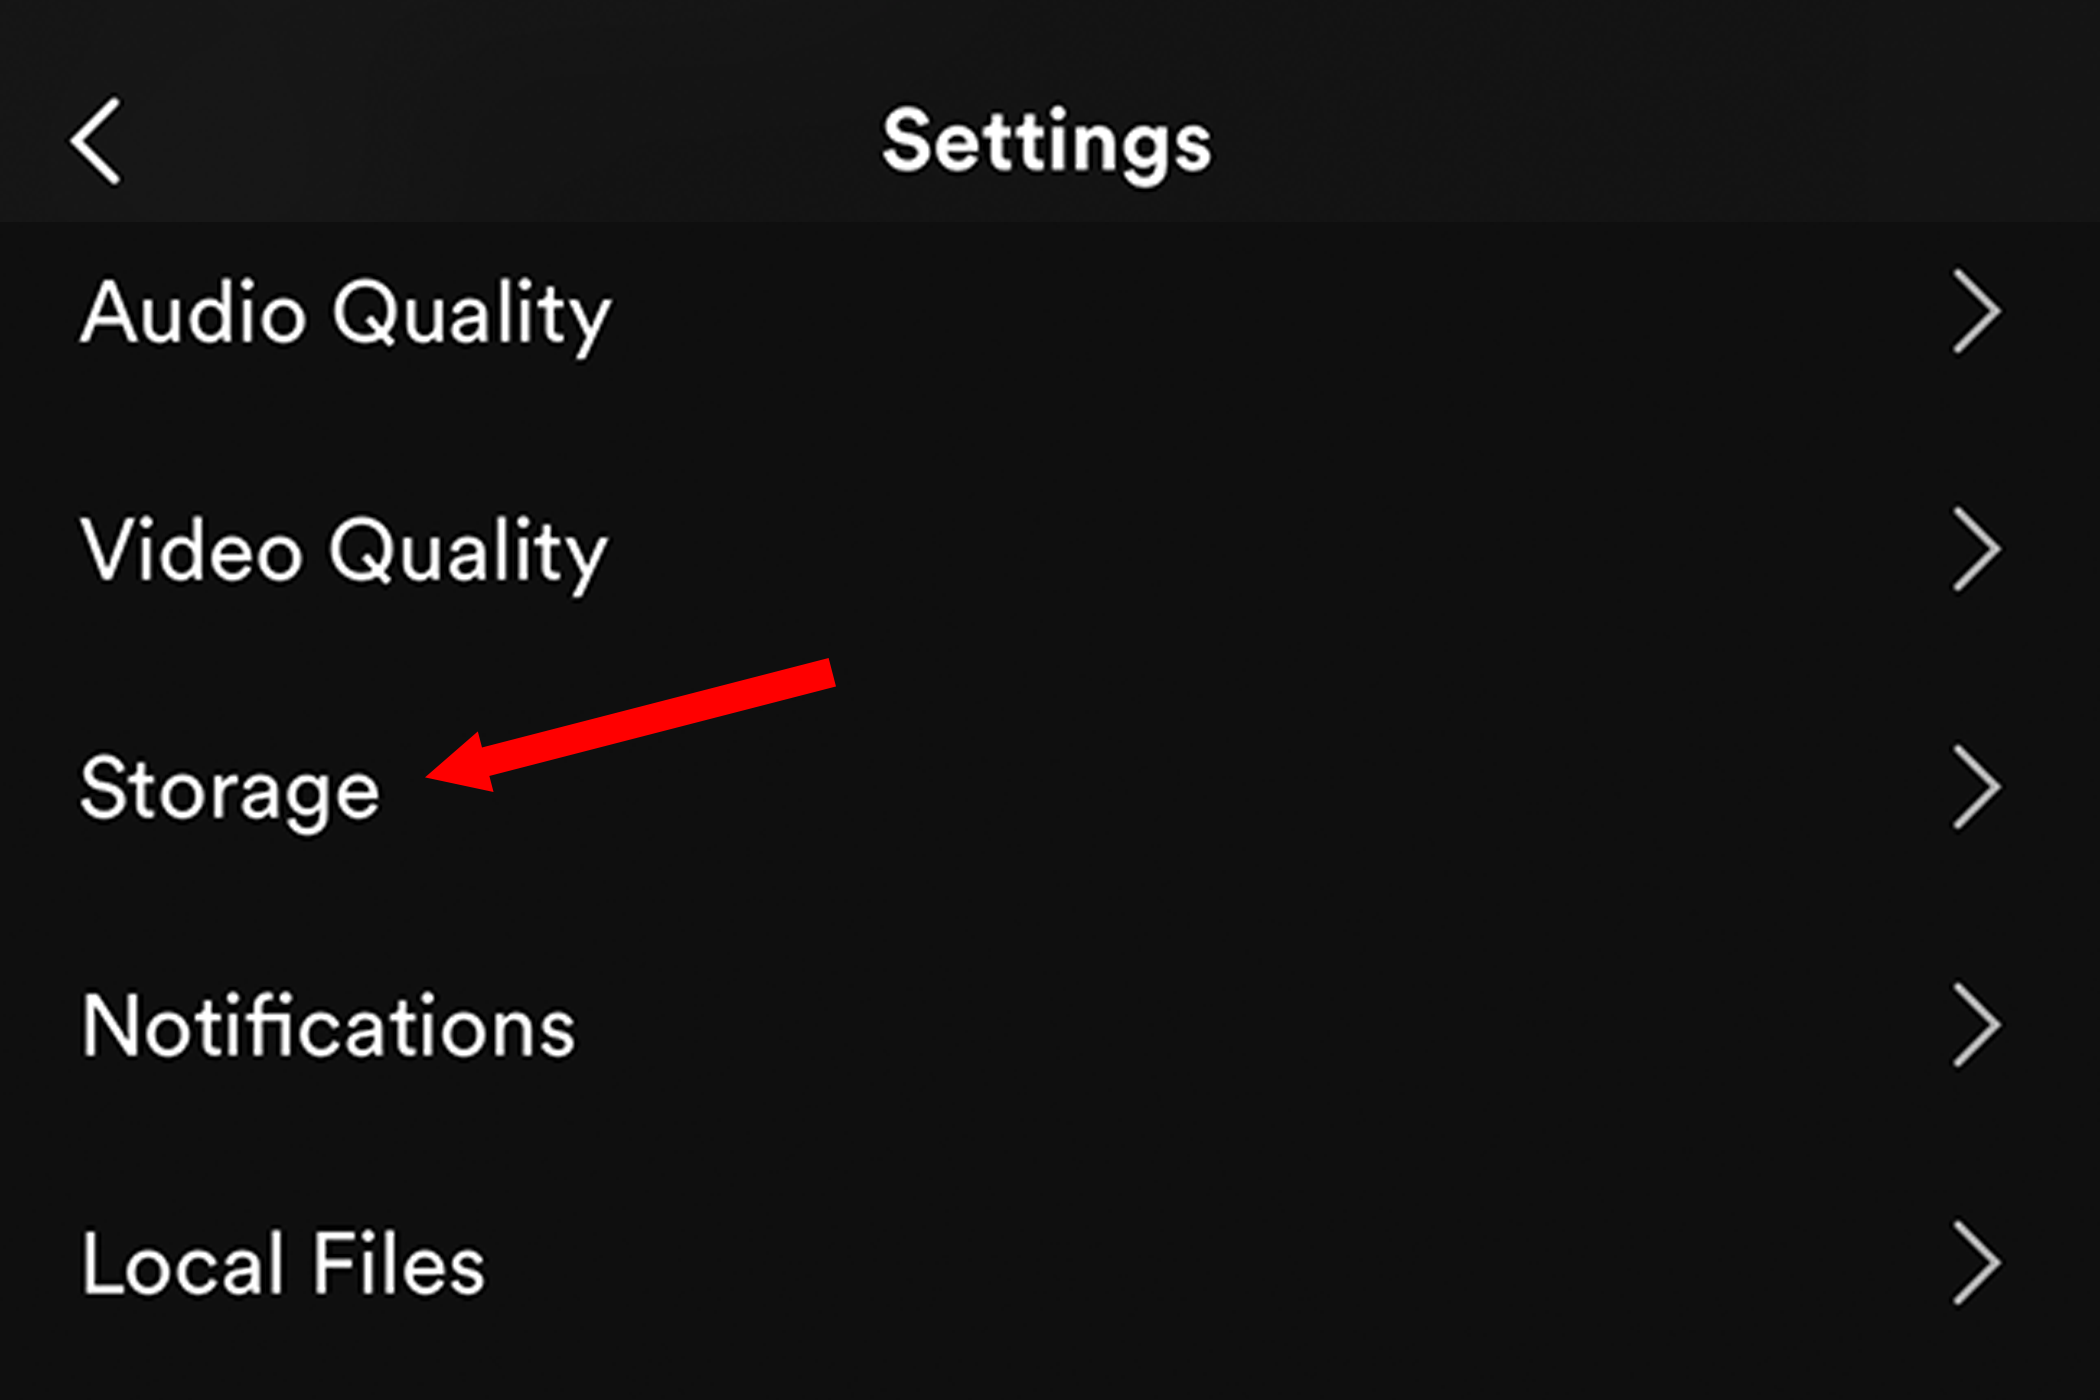 Entering the Storage settings in the Spotify mobile app.